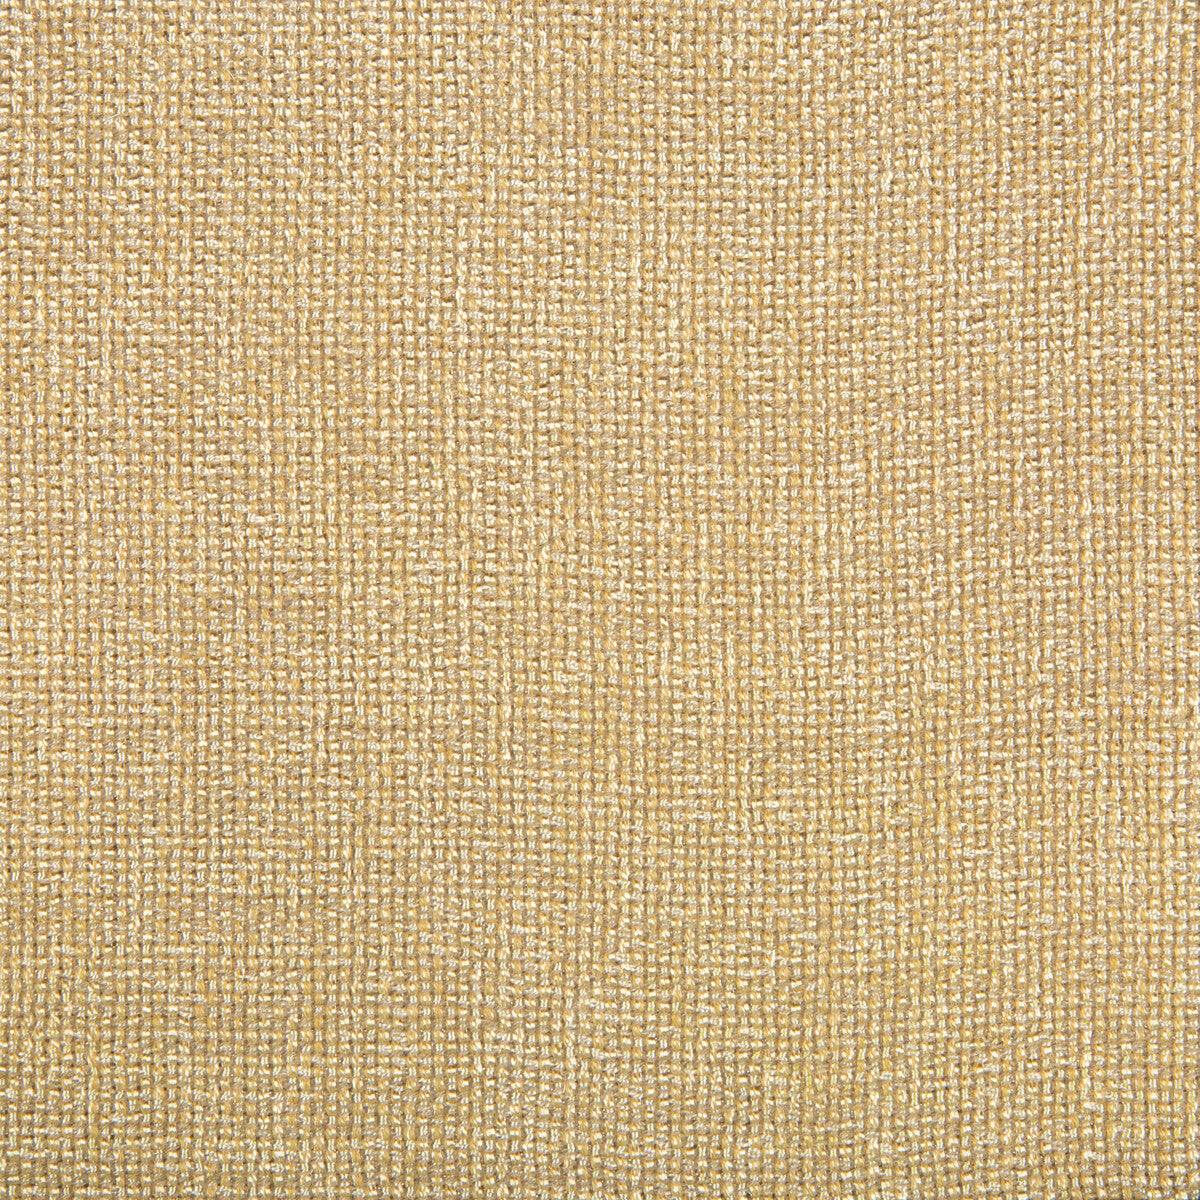 Kravet Contract fabric in 4458-16 color - pattern 4458.16.0 - by Kravet Contract